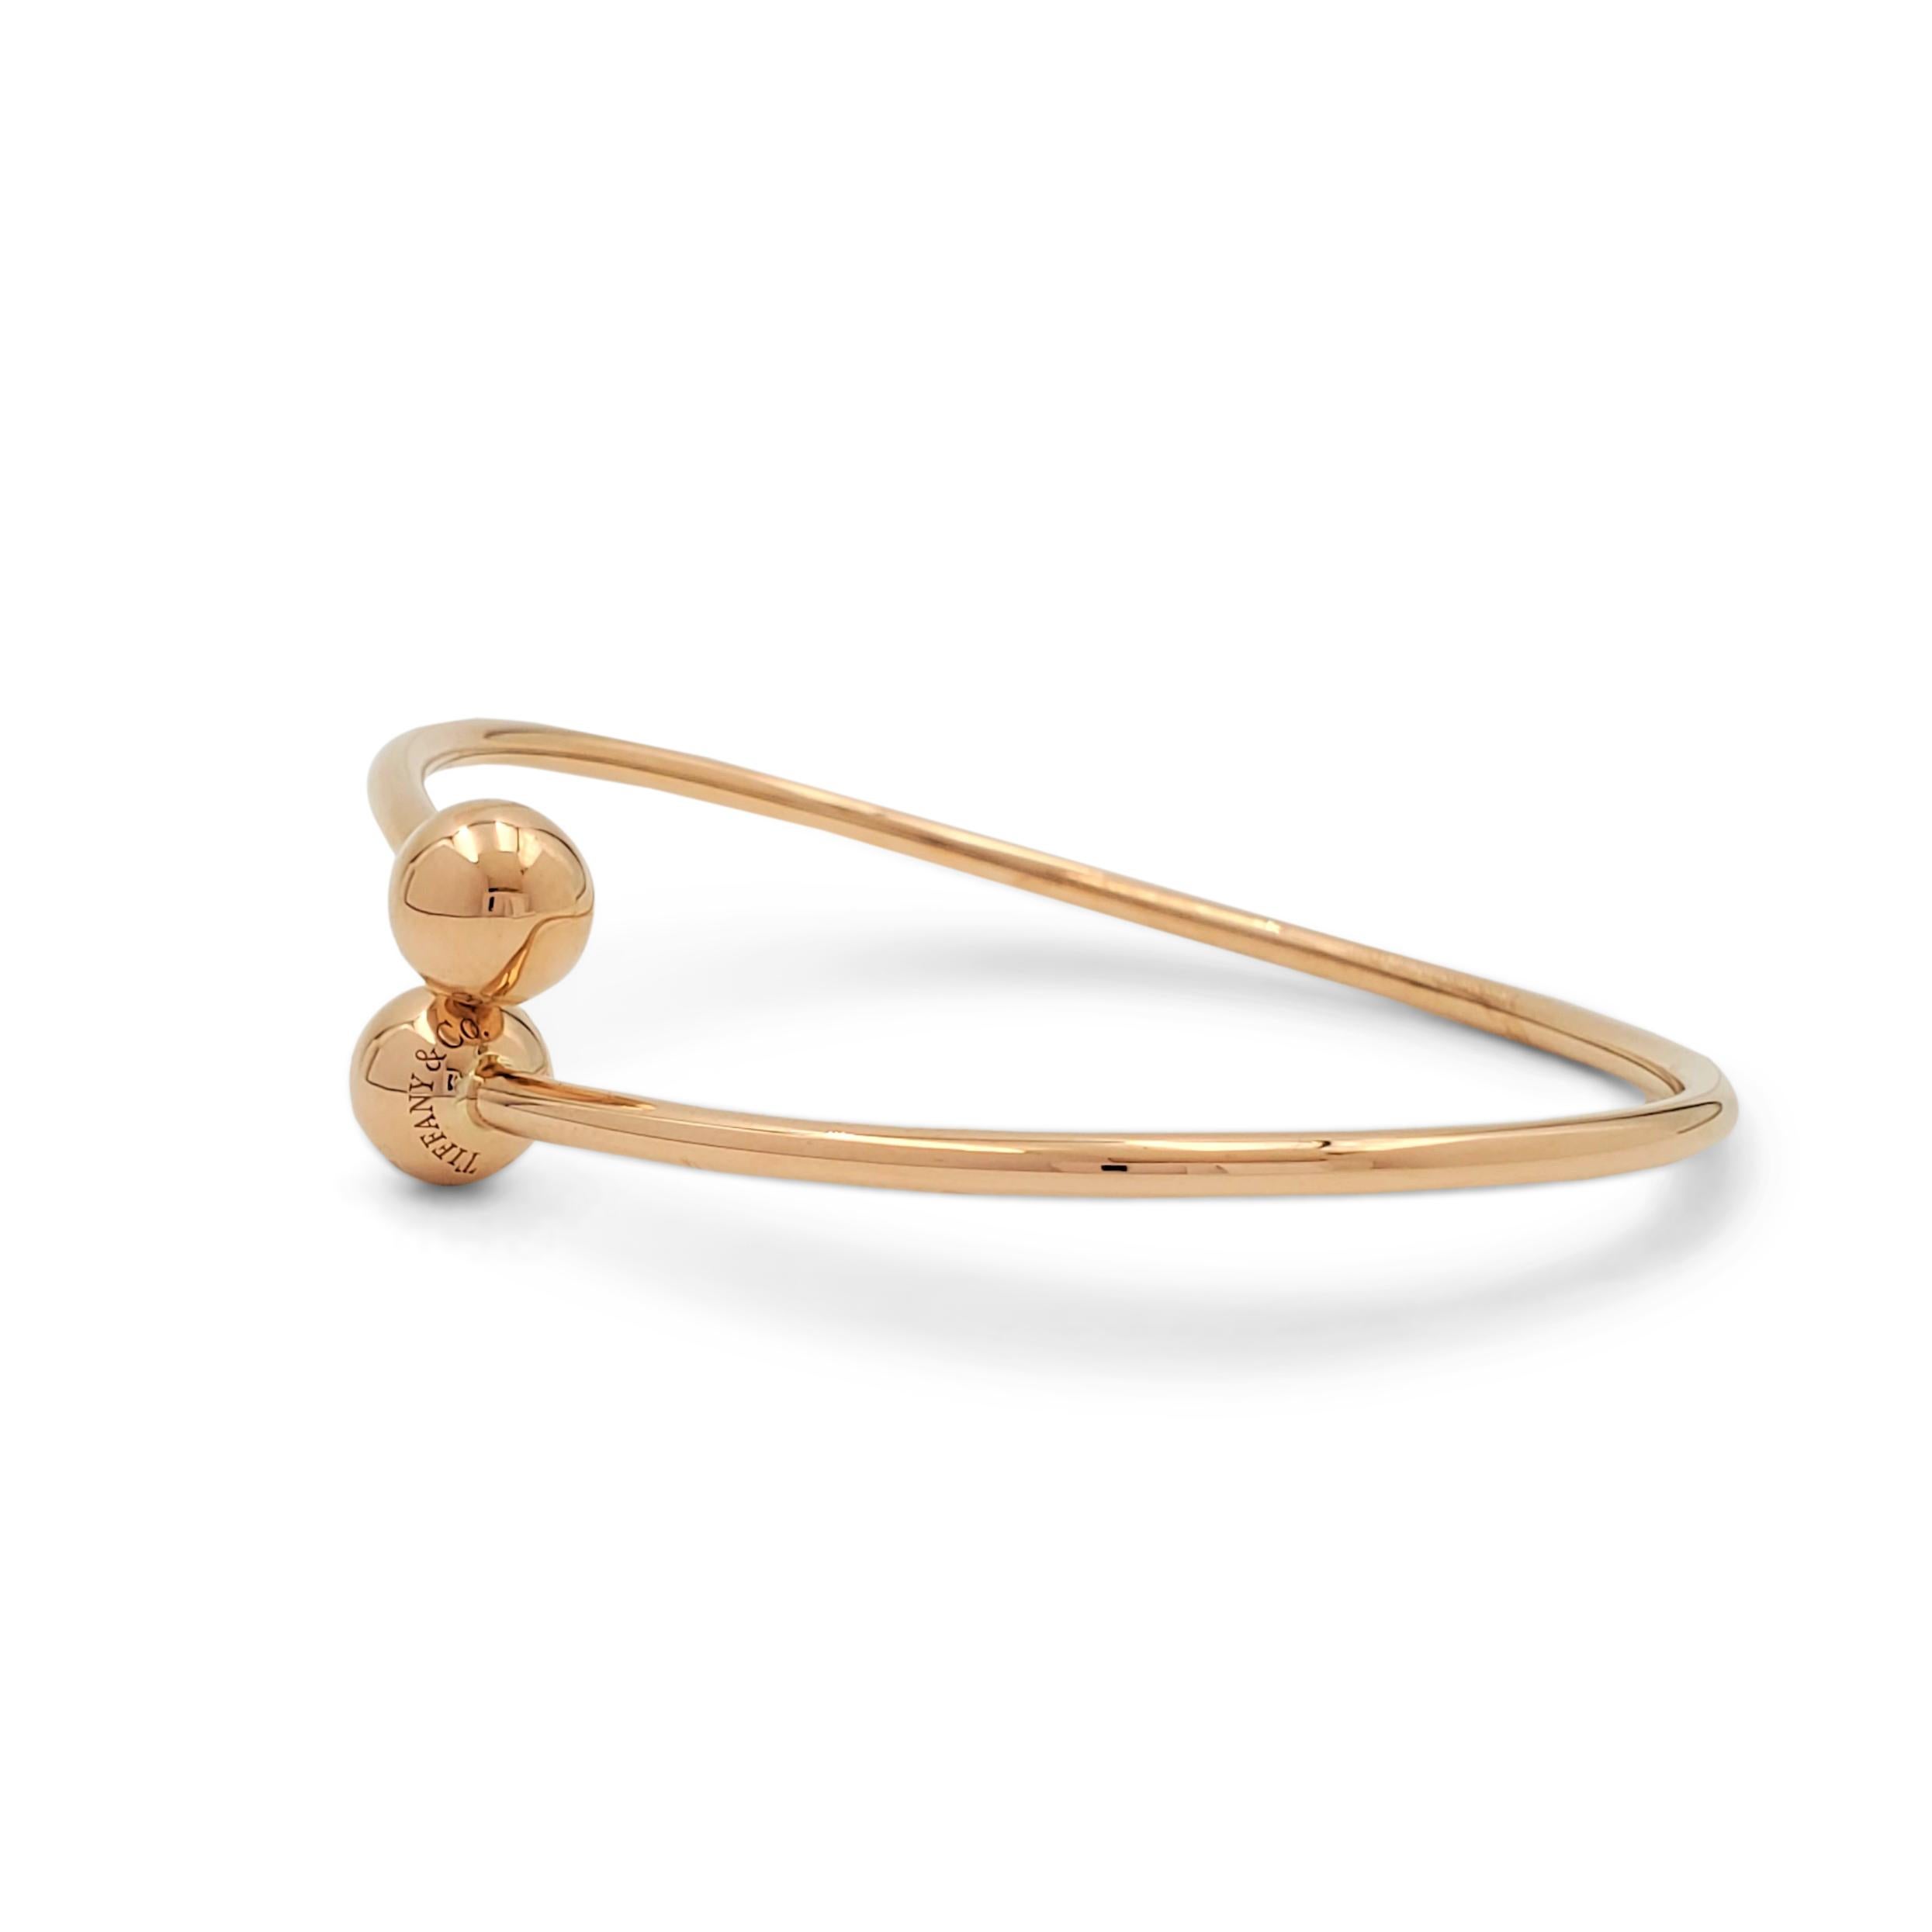 Simple and timeless Tiffany & Co. 'HardWear Ball Bypass' bracelet crafted in solid 18 karat rose gold. Signed Tiffany & Co., AU750 ITALY on the base of the bangle and 'NEW YORK' on the ball ends. The bracelet is not presented with the original box